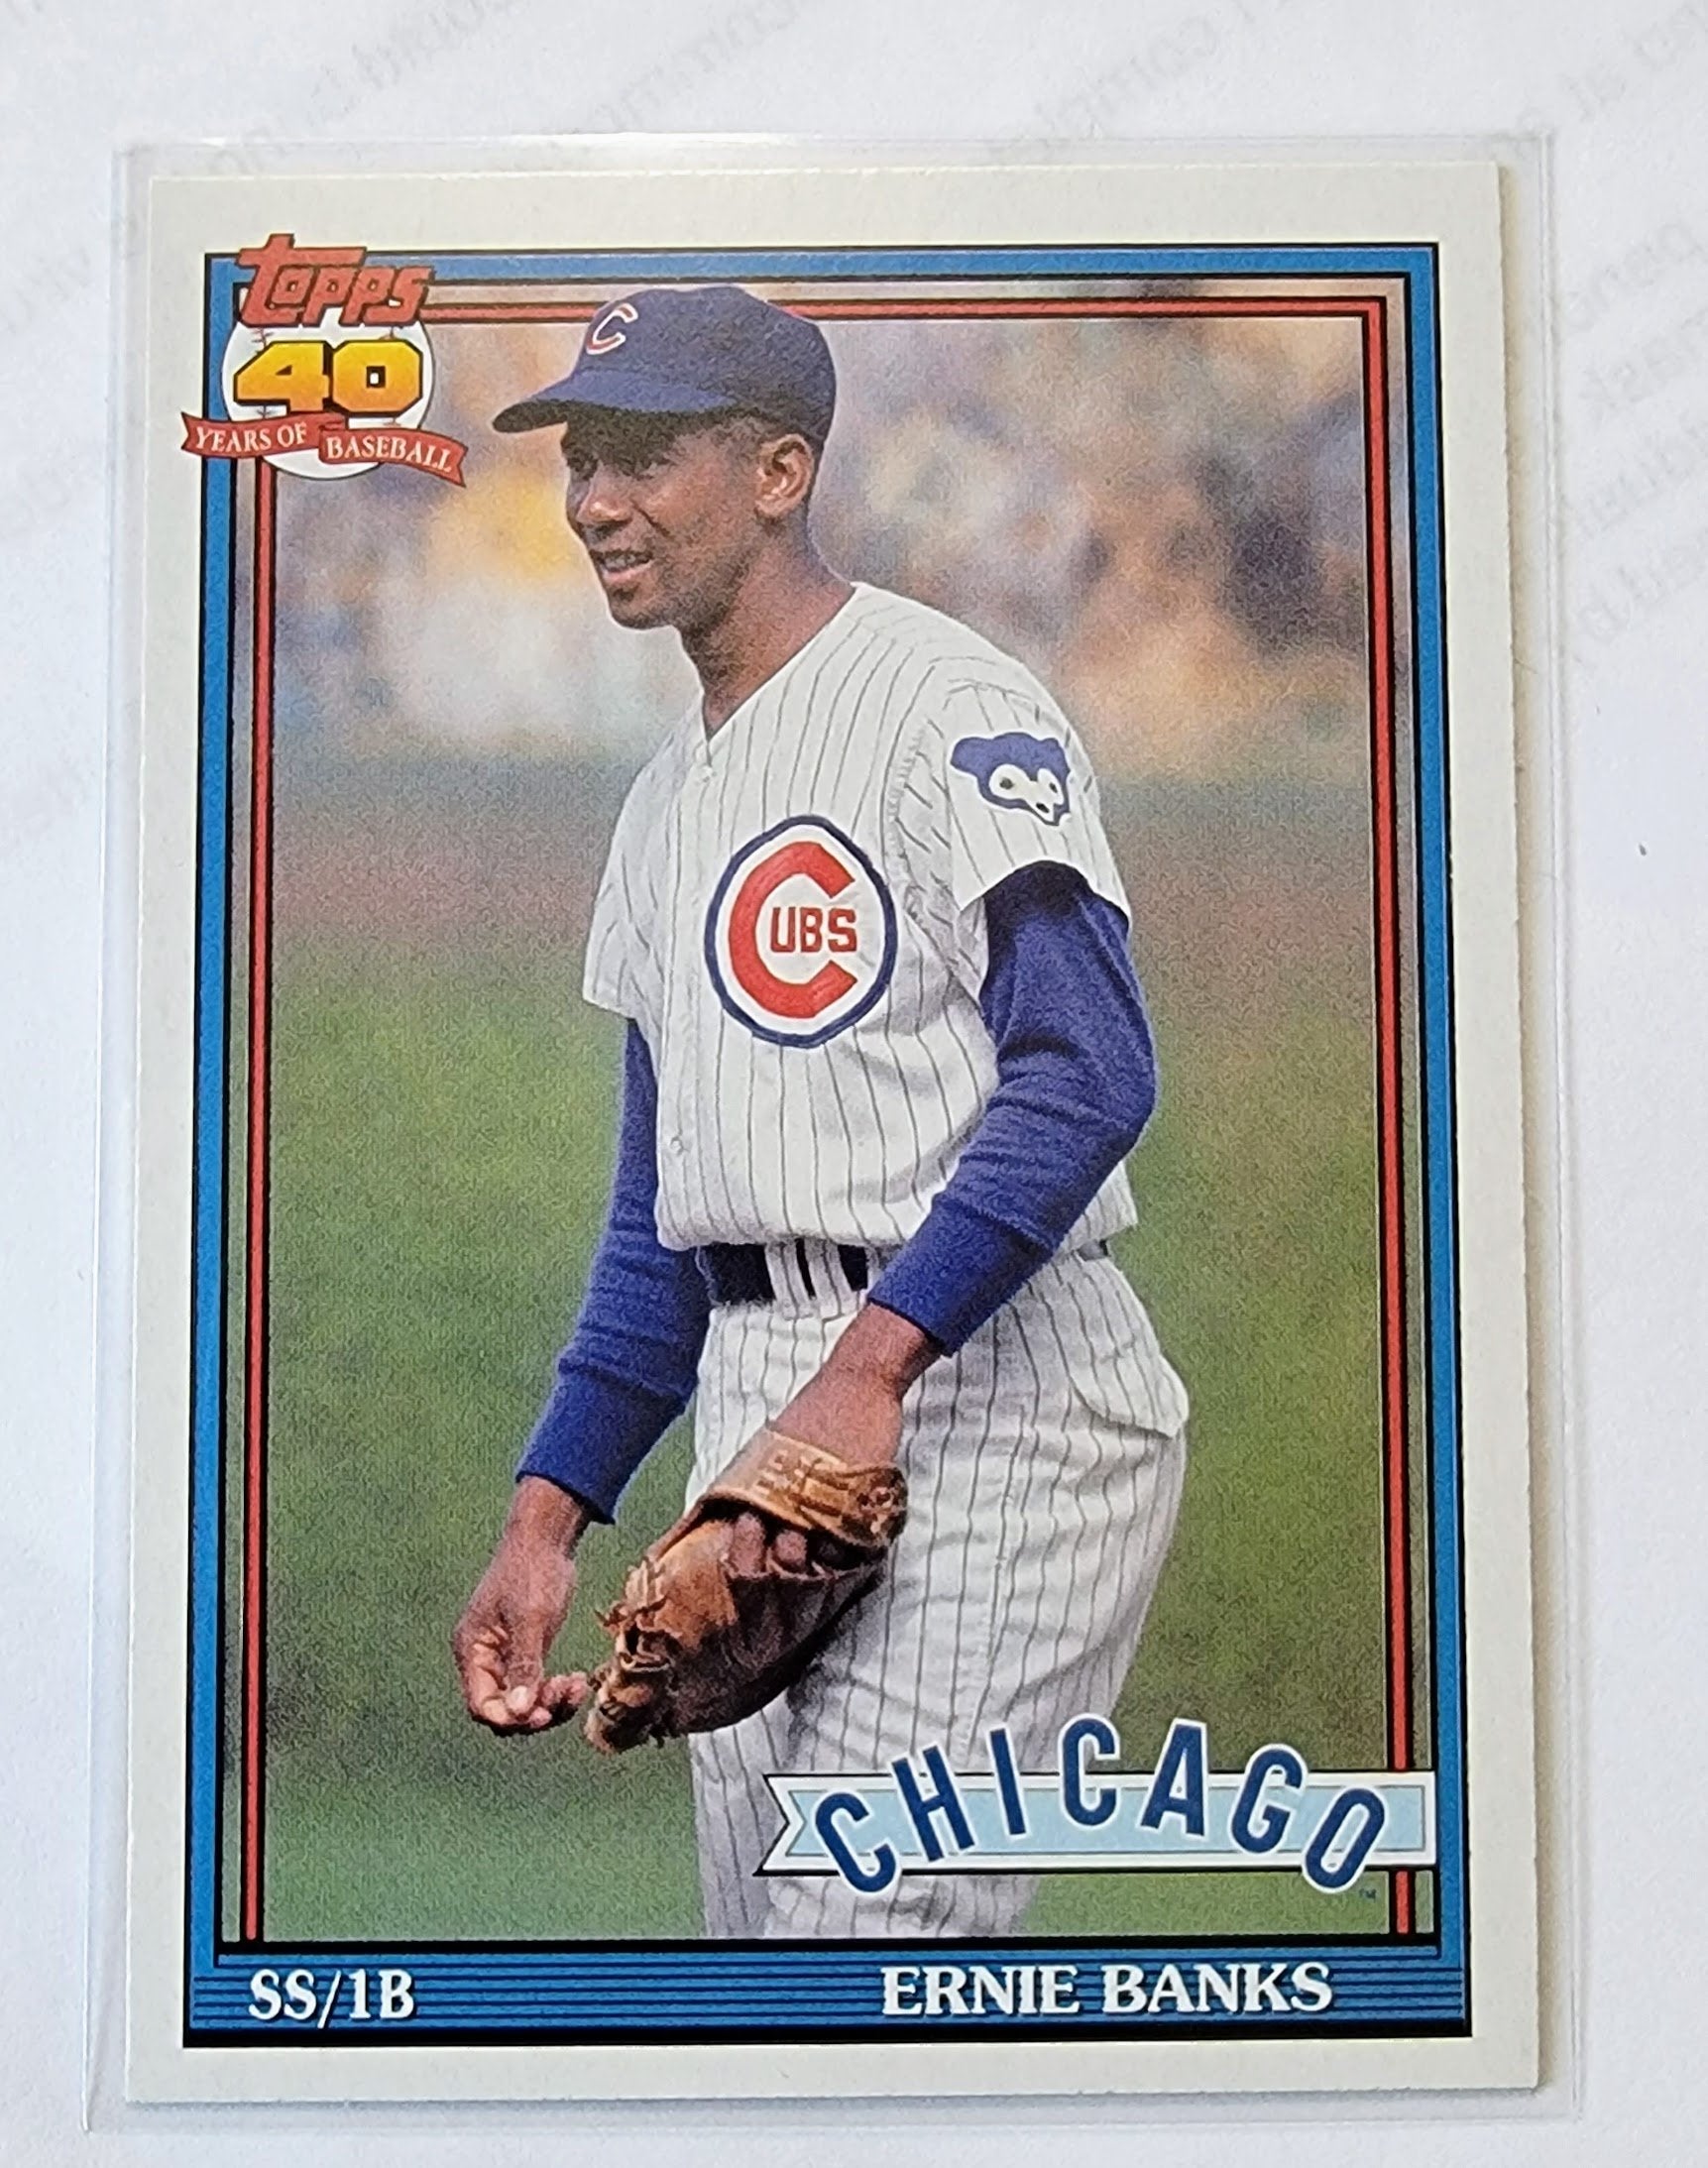 2021 Topps Archives Ernie Banks 1991 Baseball Trading Card SMCB1 simple Xclusive Collectibles   